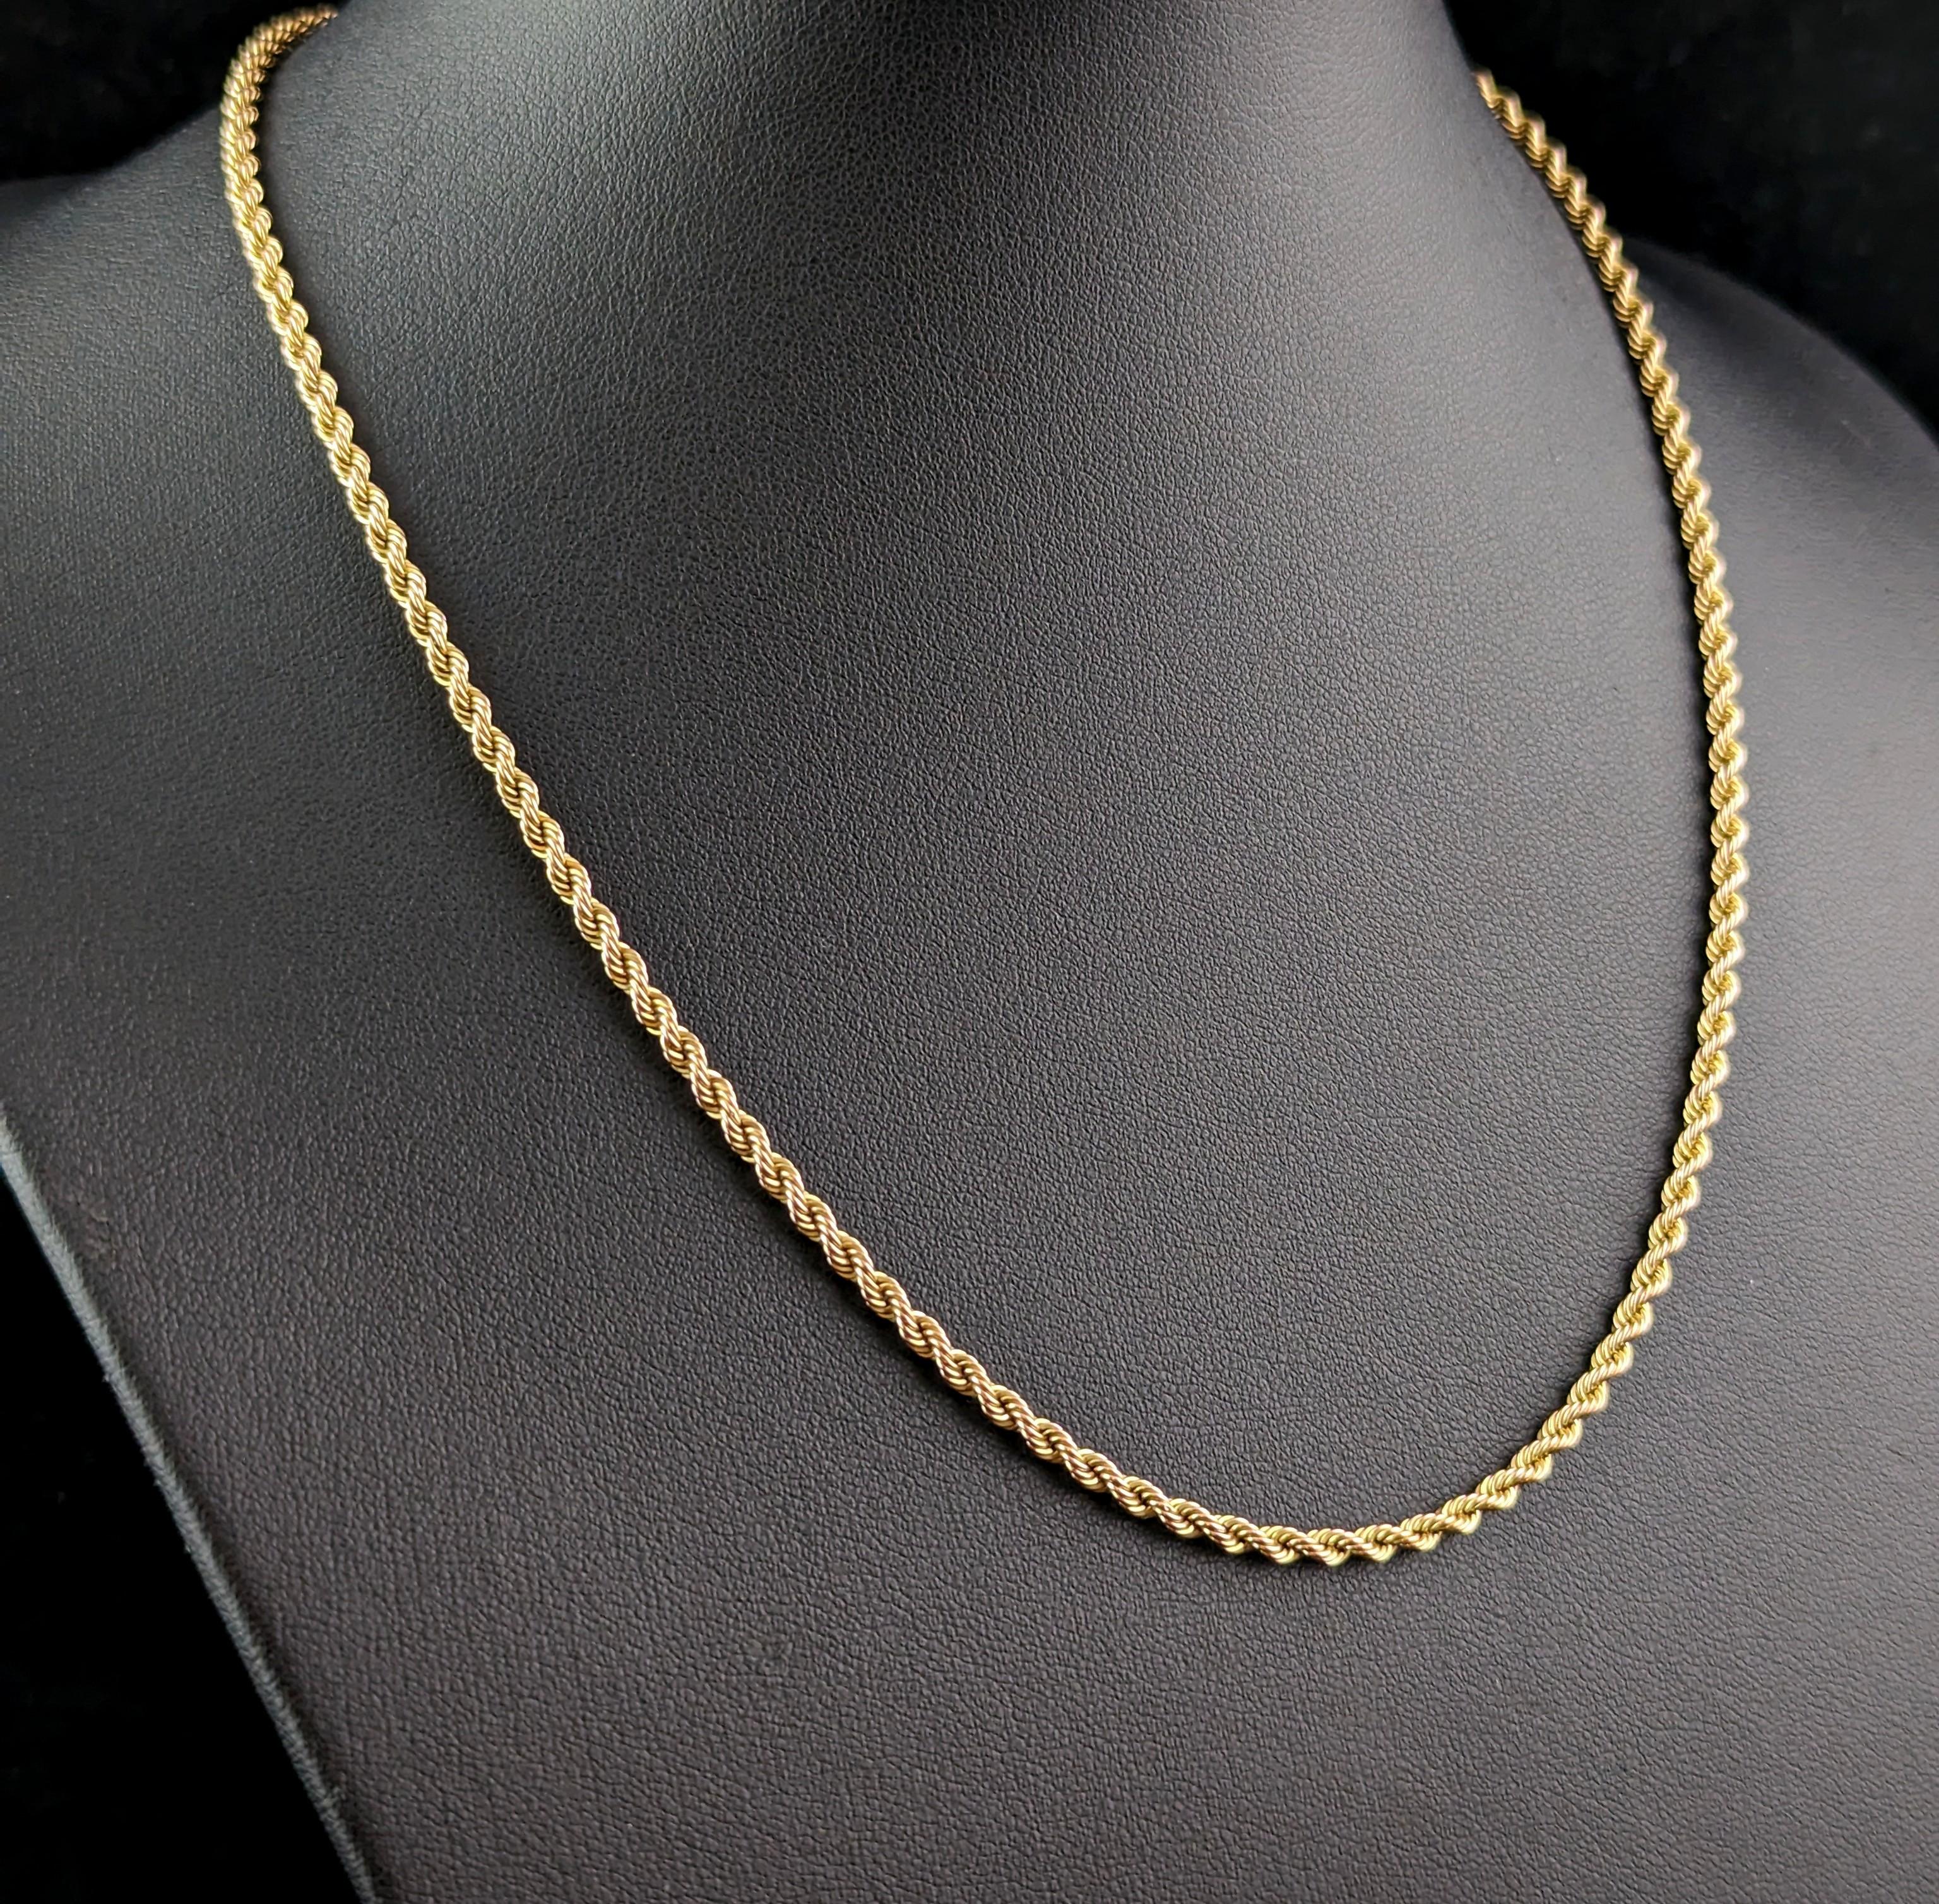 Vintage 9k yellow gold rope twist link chain necklace 3